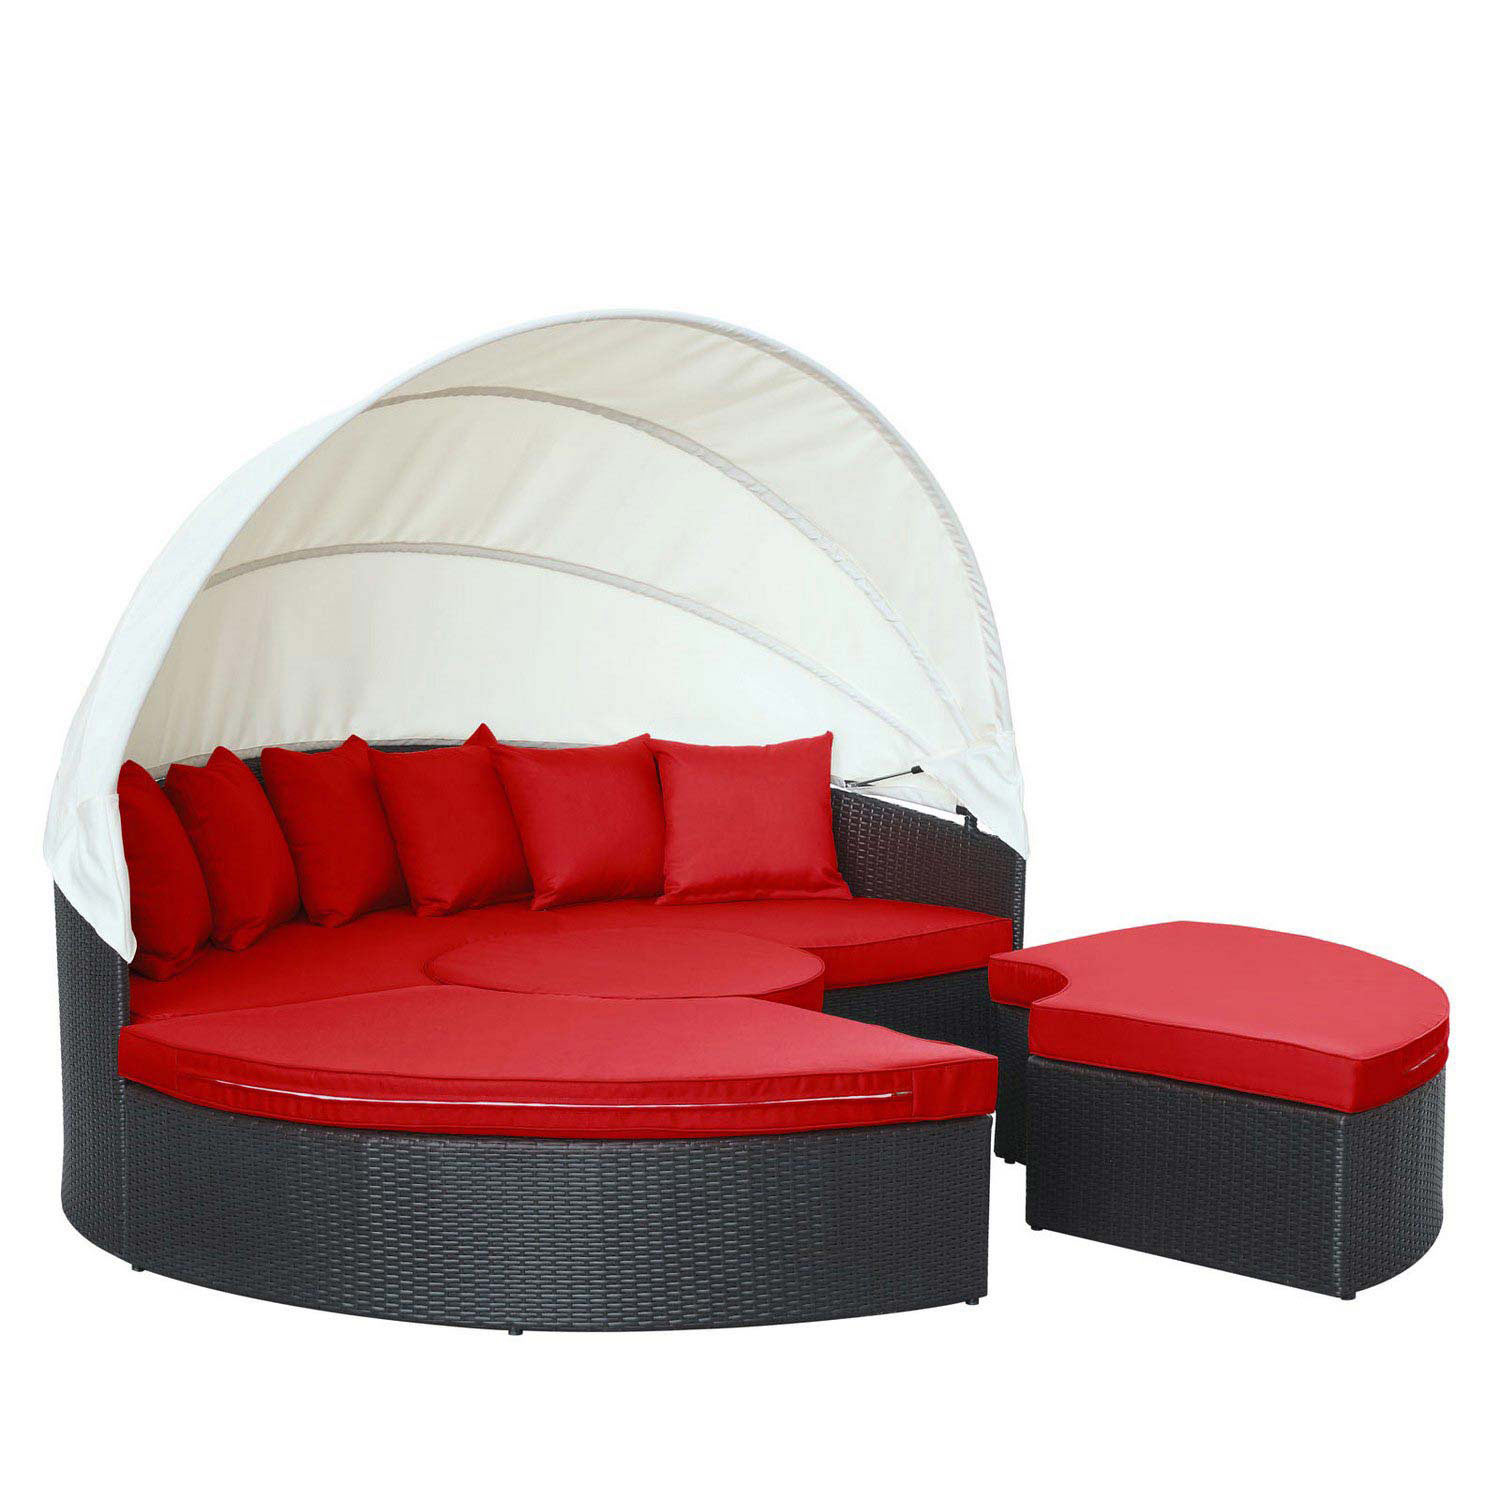 Modway Convene Canopy Outdoor Patio Daybed - Espresso/Red